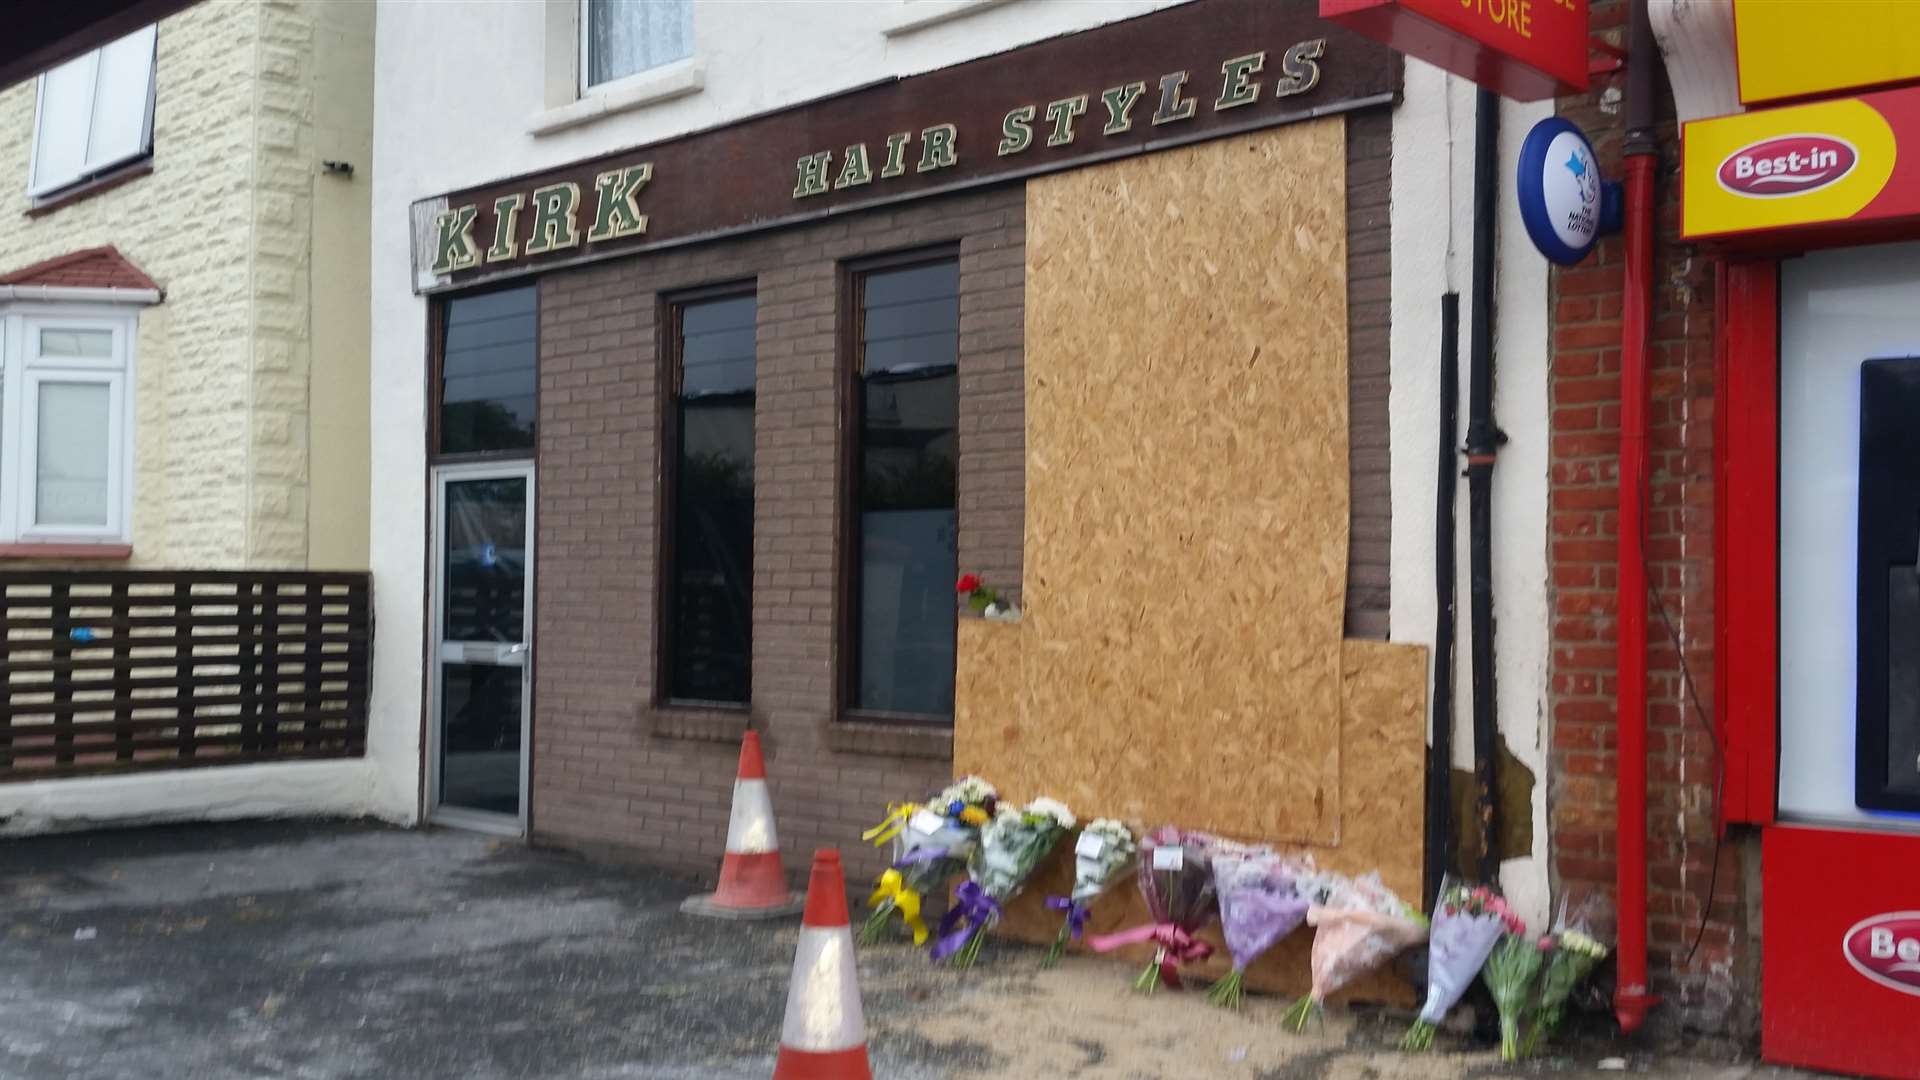 Bouquets of flowers have been left outside the hairdressers